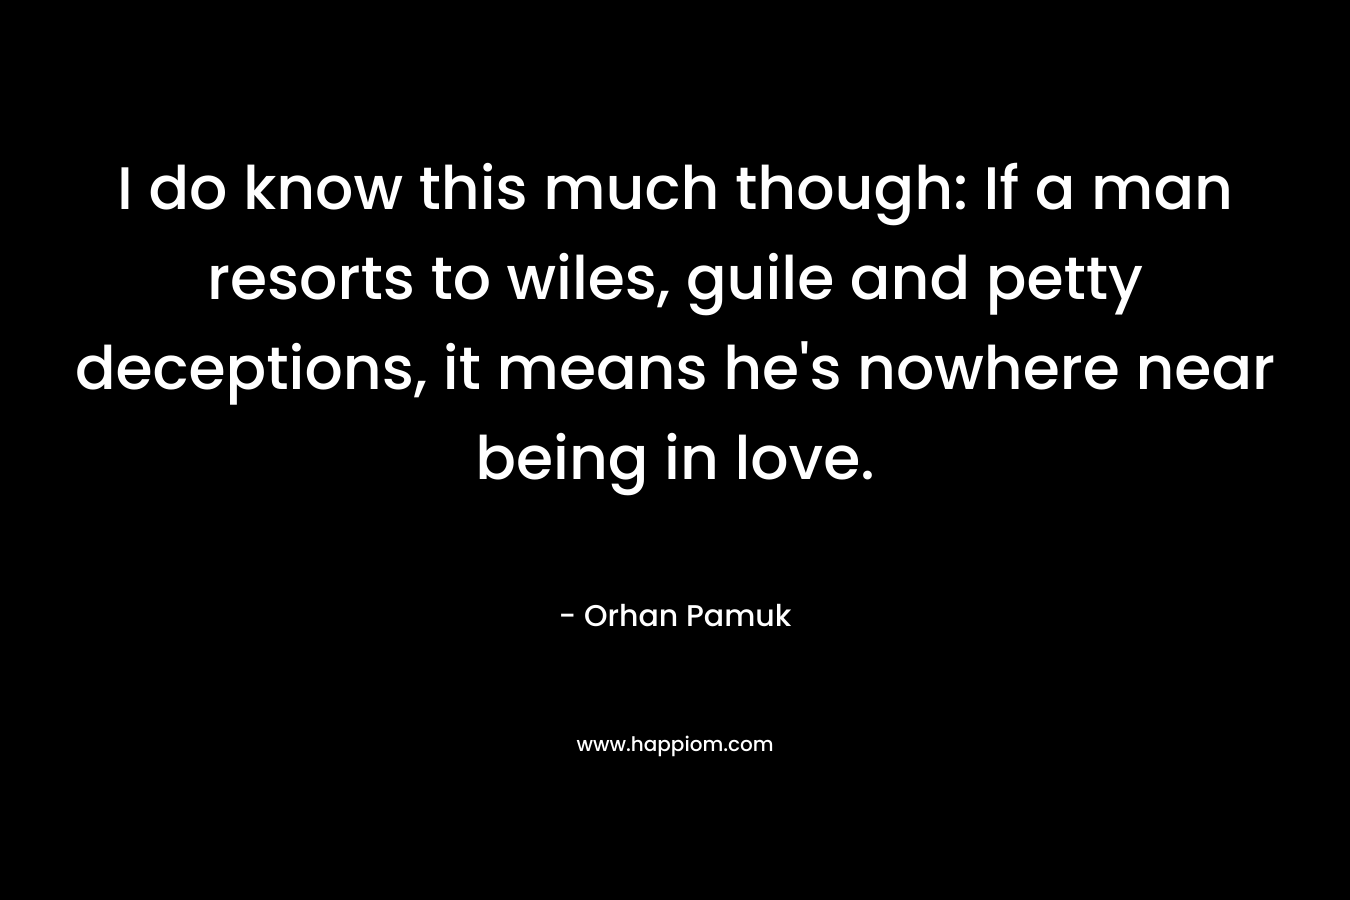 I do know this much though: If a man resorts to wiles, guile and petty deceptions, it means he’s nowhere near being in love. – Orhan Pamuk